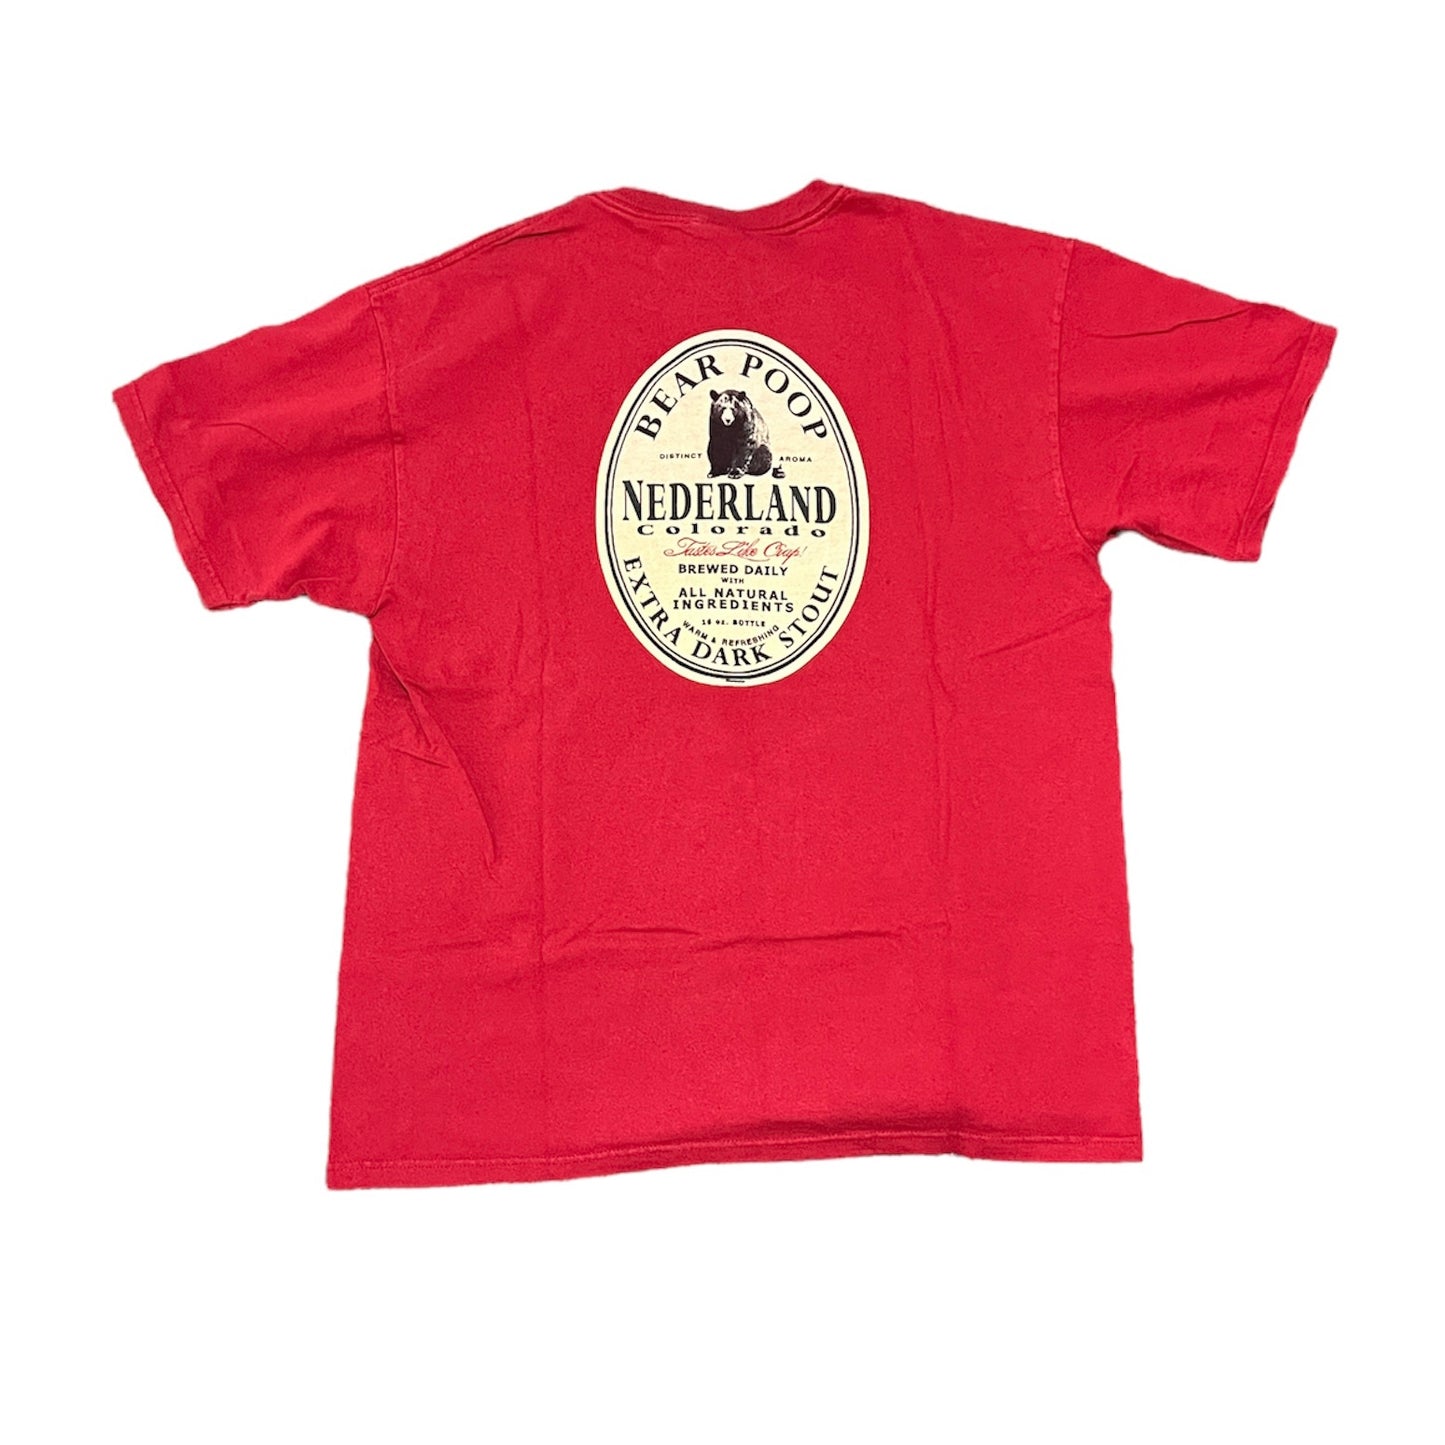 Nederland Colorado Brewery T-Shirt Size X-Large